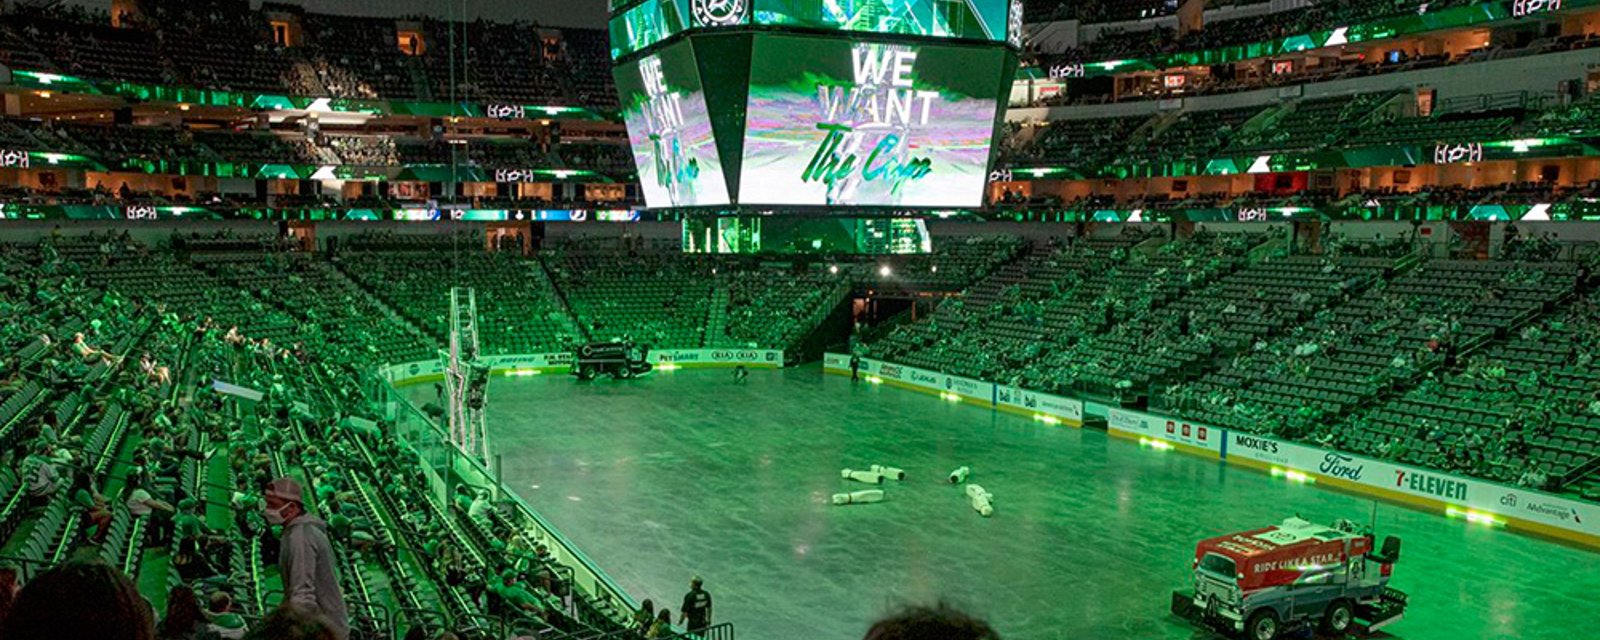 Teenage girl victimized by human traffickers at home of Dallas Stars 